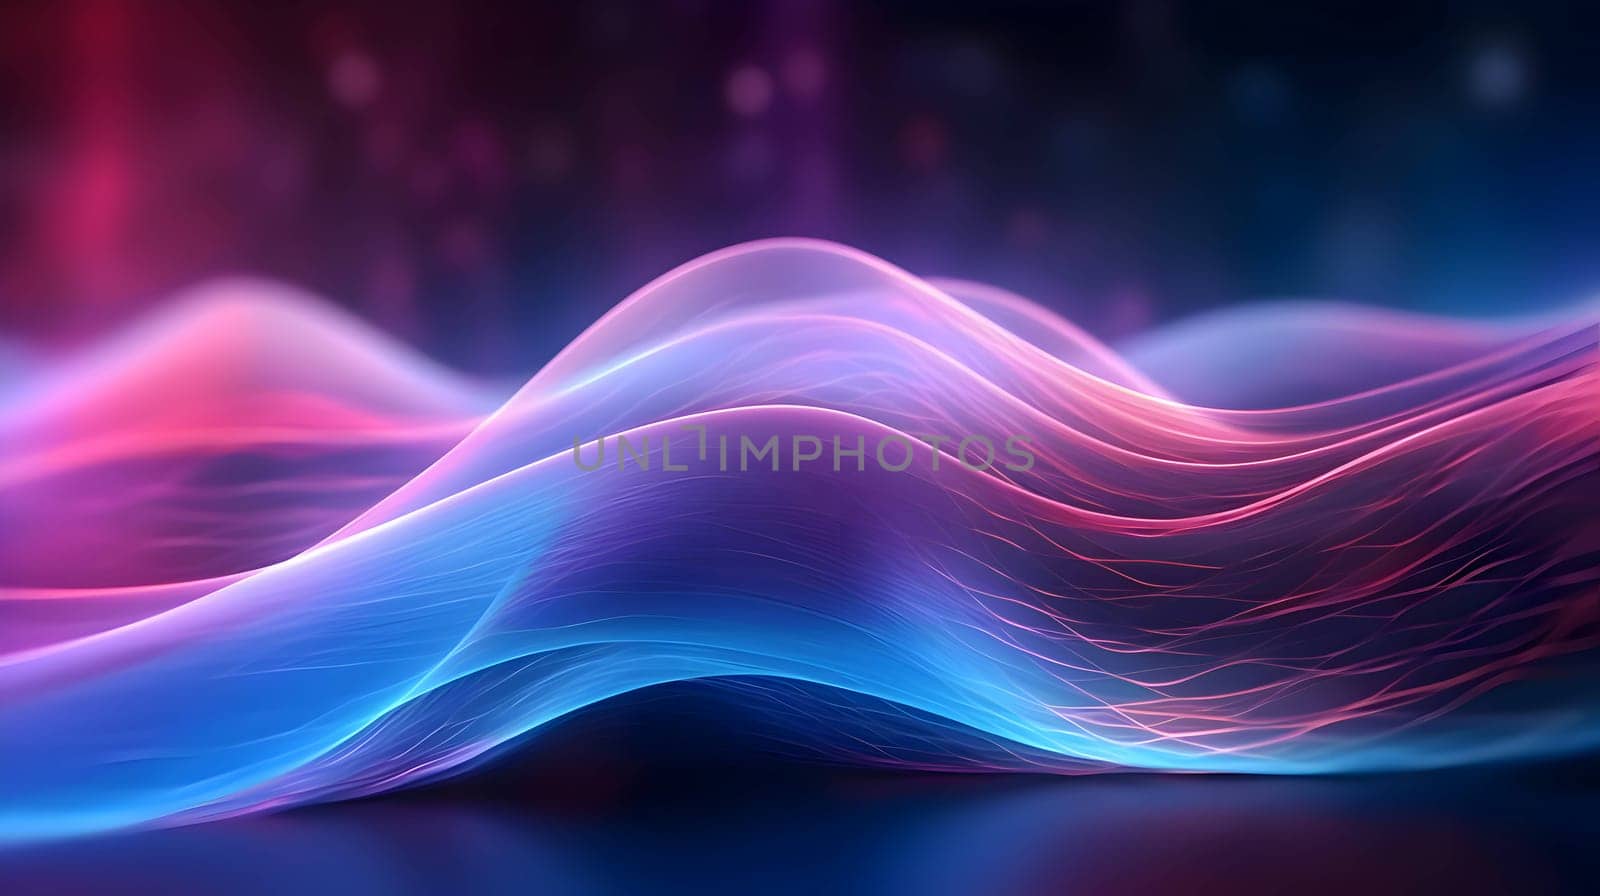 A 3D modern tech abstract background wallpaper featuring a technological wave design, merging innovation and aesthetics.